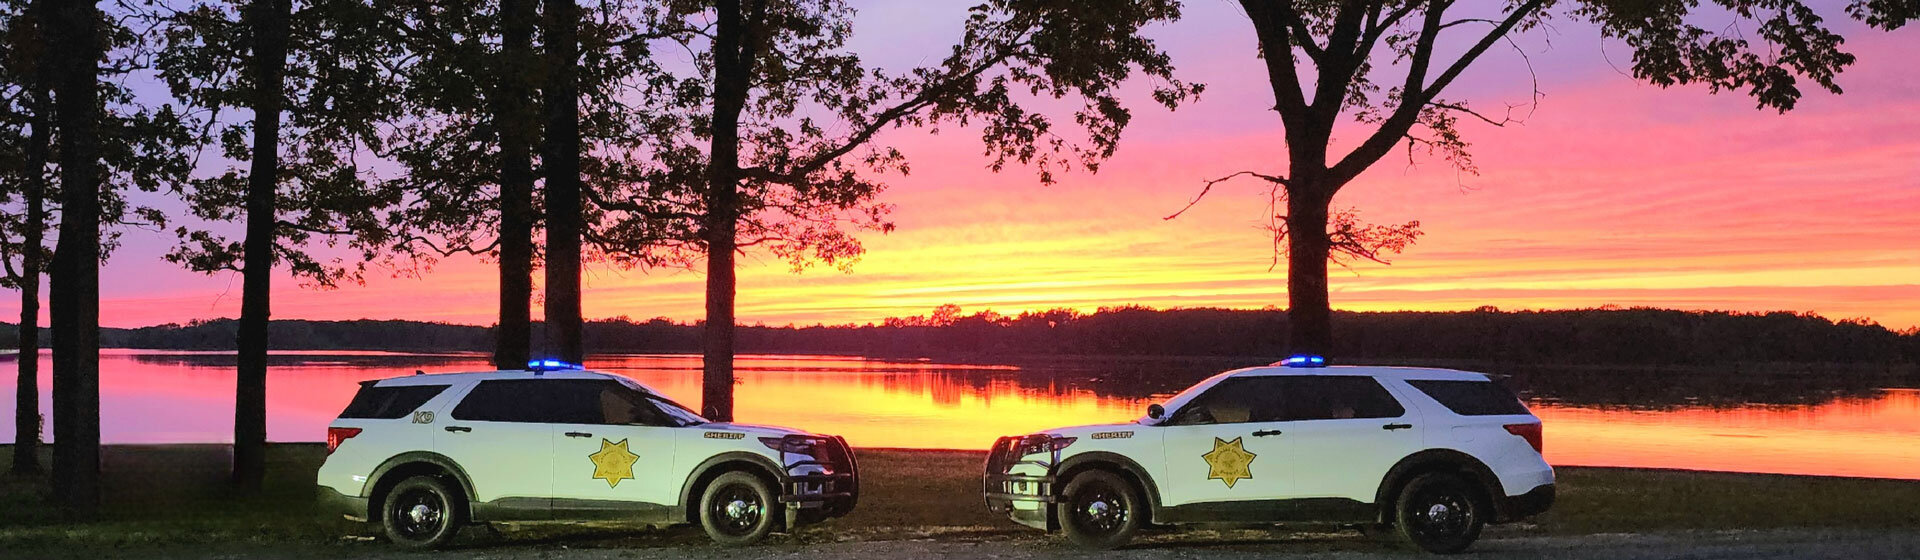 2 Sheriff's Office Vehicle with bright sunset in background